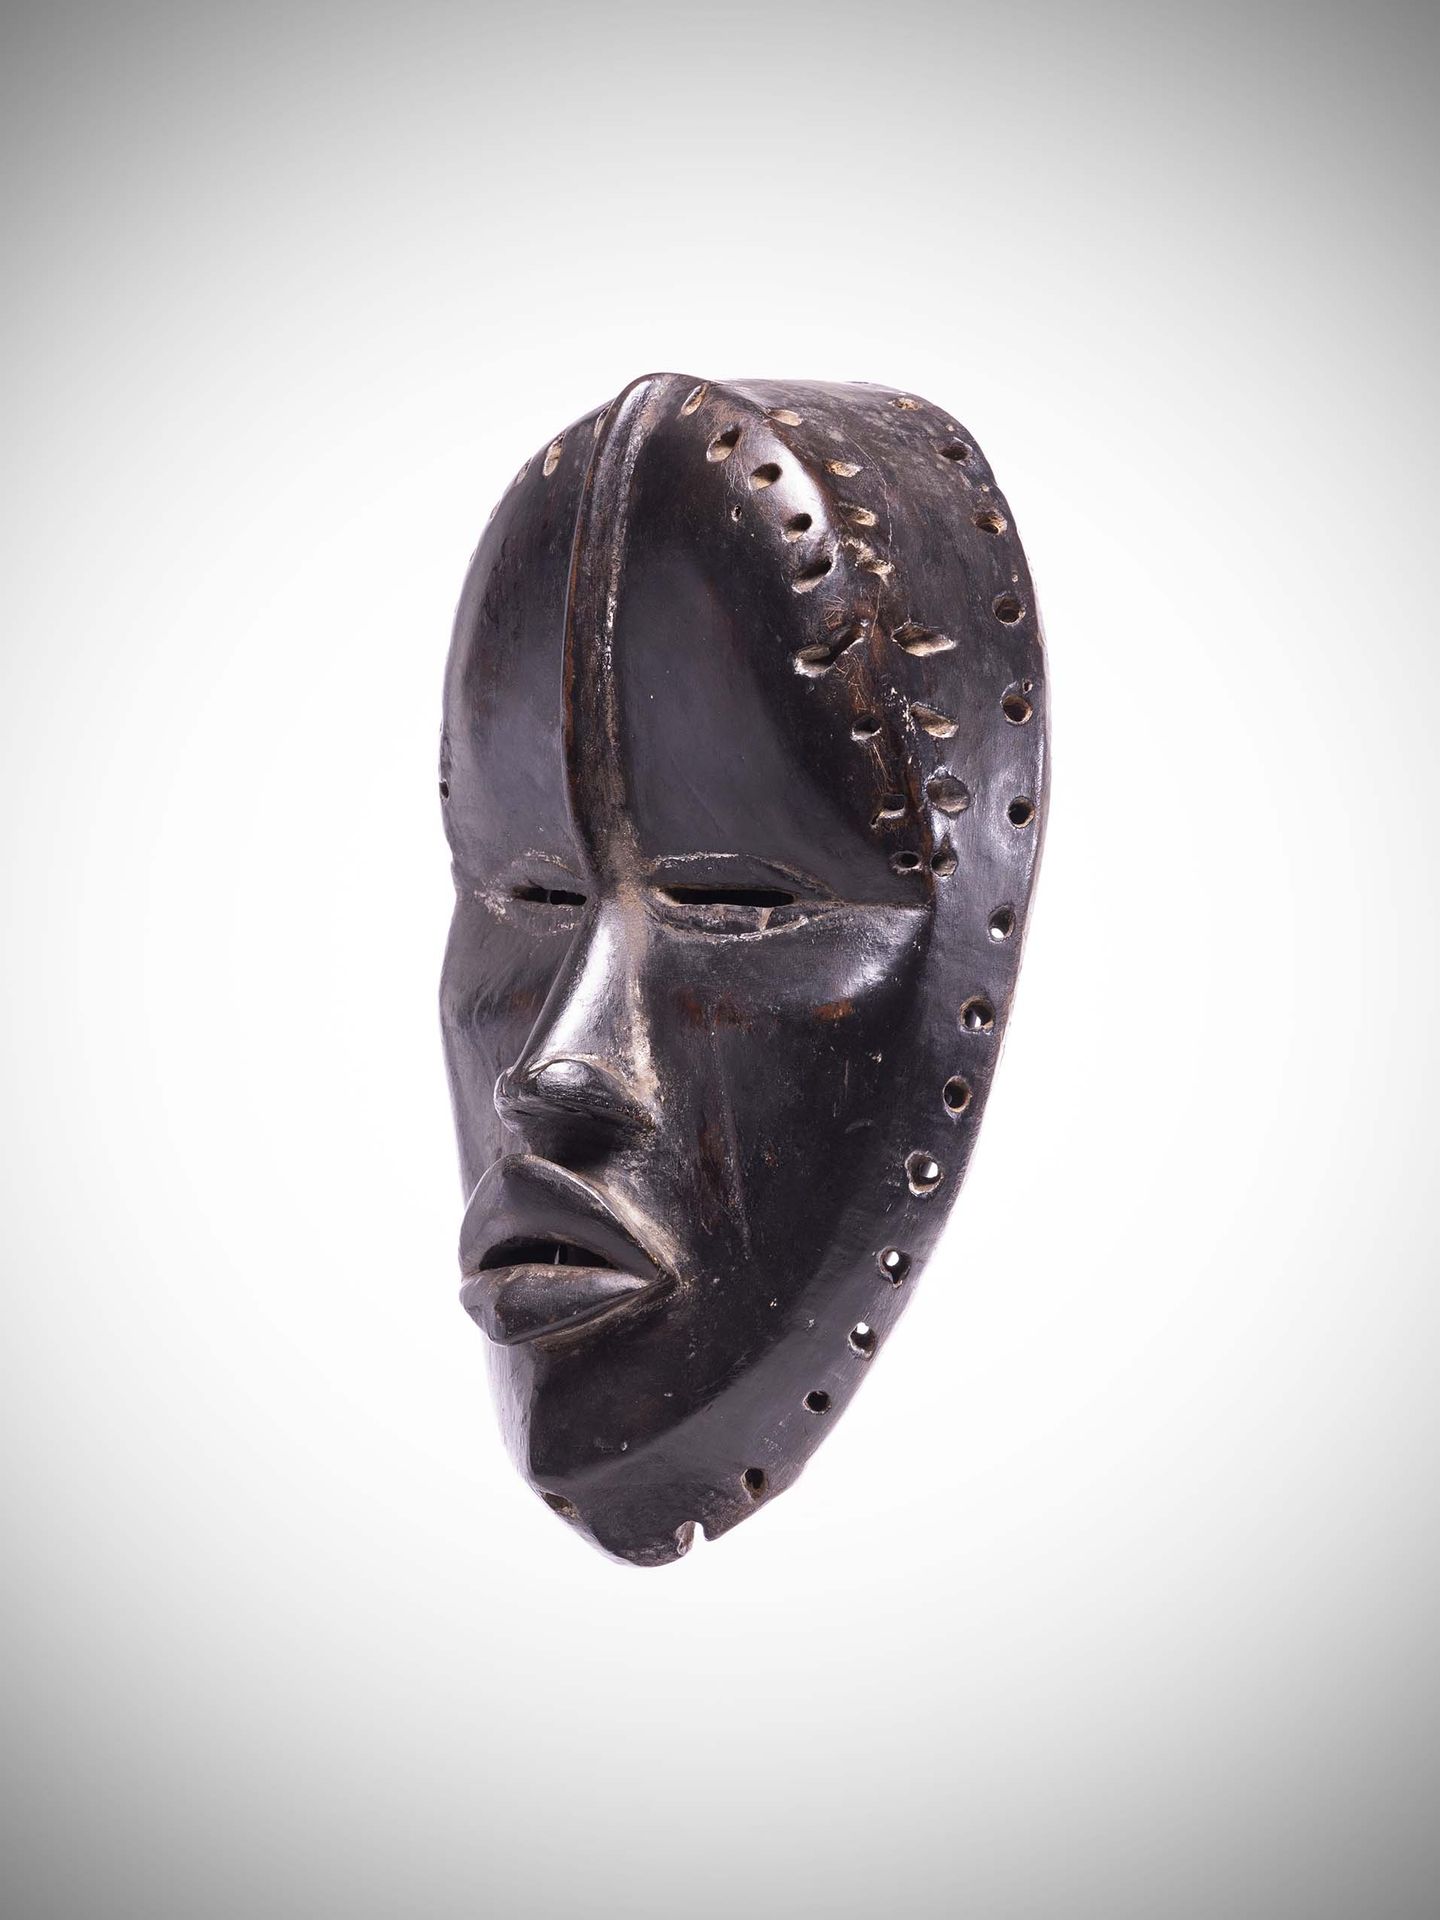 Null Dan

(Ivory Coast) Very elegant mask with black lacquered patina.

A fronta&hellip;